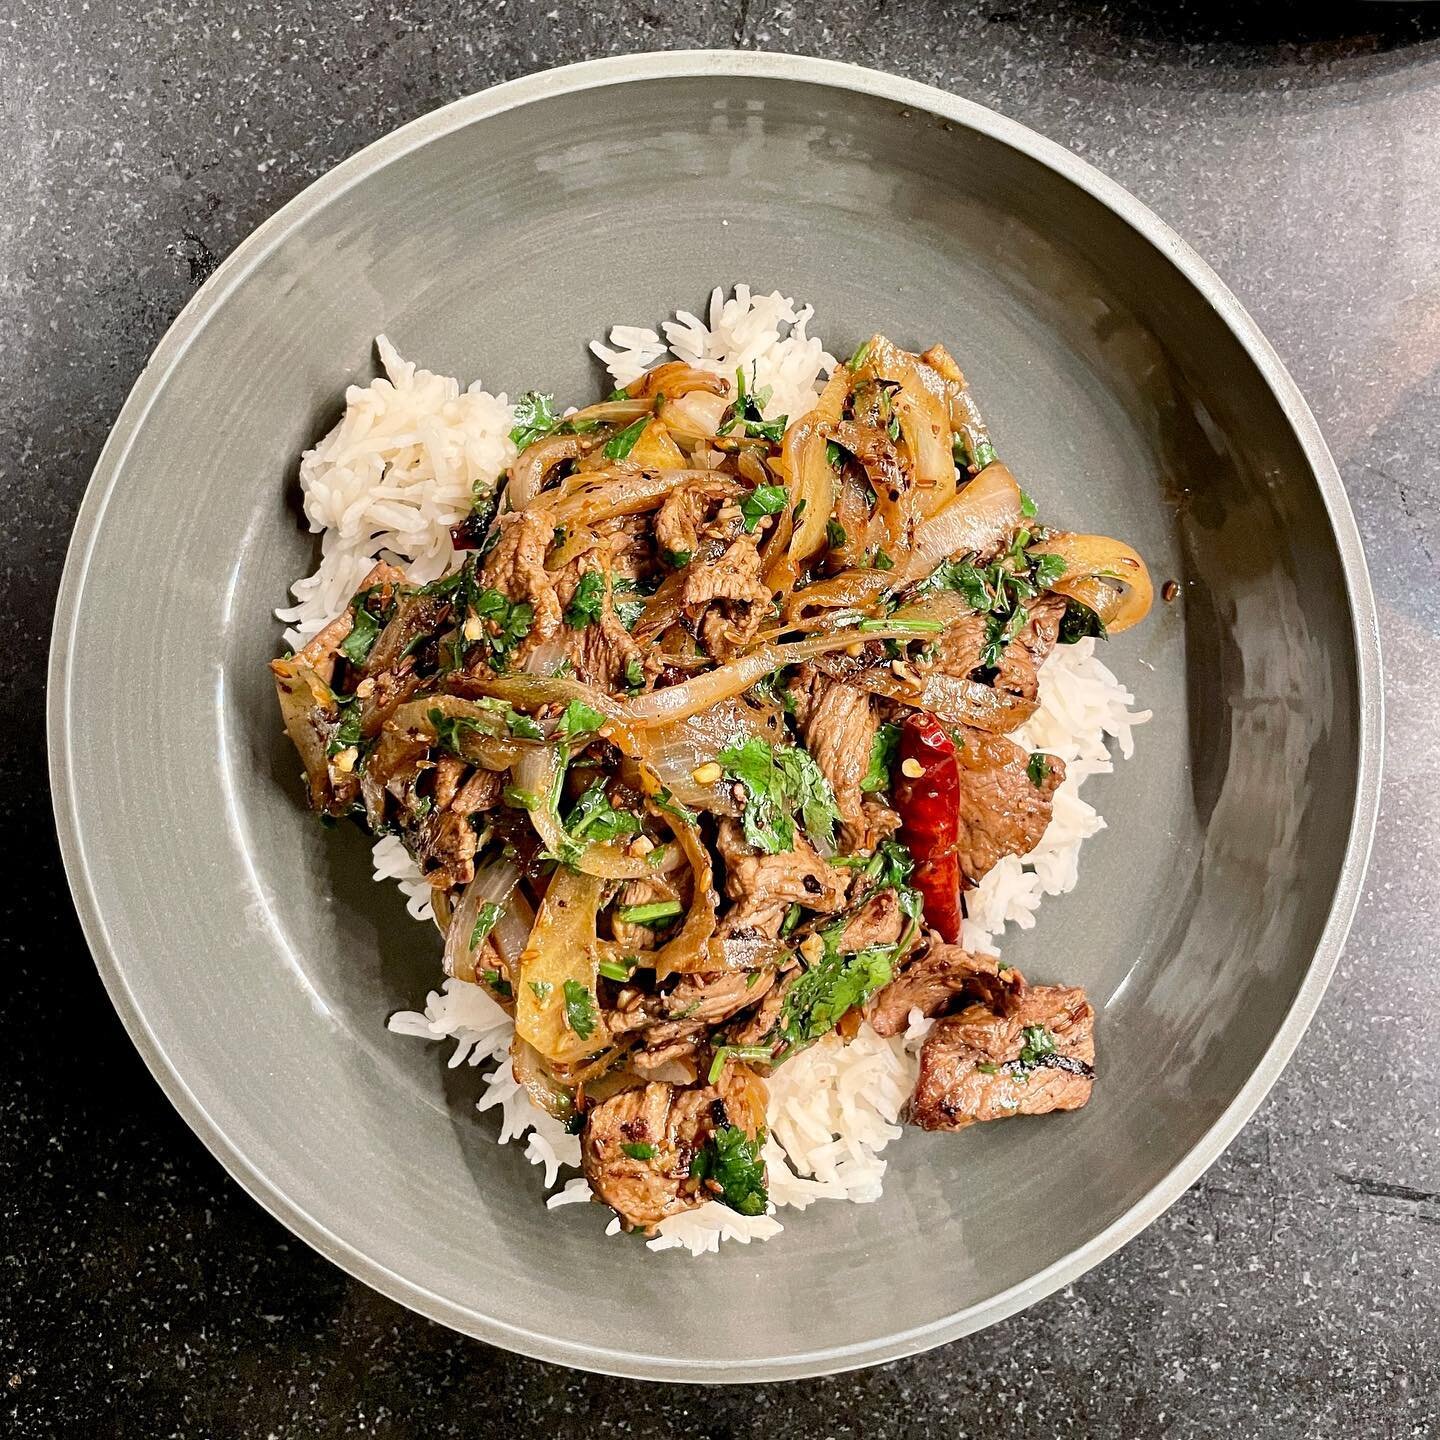 If you&rsquo;re looking for an adrenaline rush while you cook, this recipe for a spicy stir-fried cumin beef will certainly get your heart going. Preparing all of the ingredients takes the most time but once you start cooking, this is super quick. Oh